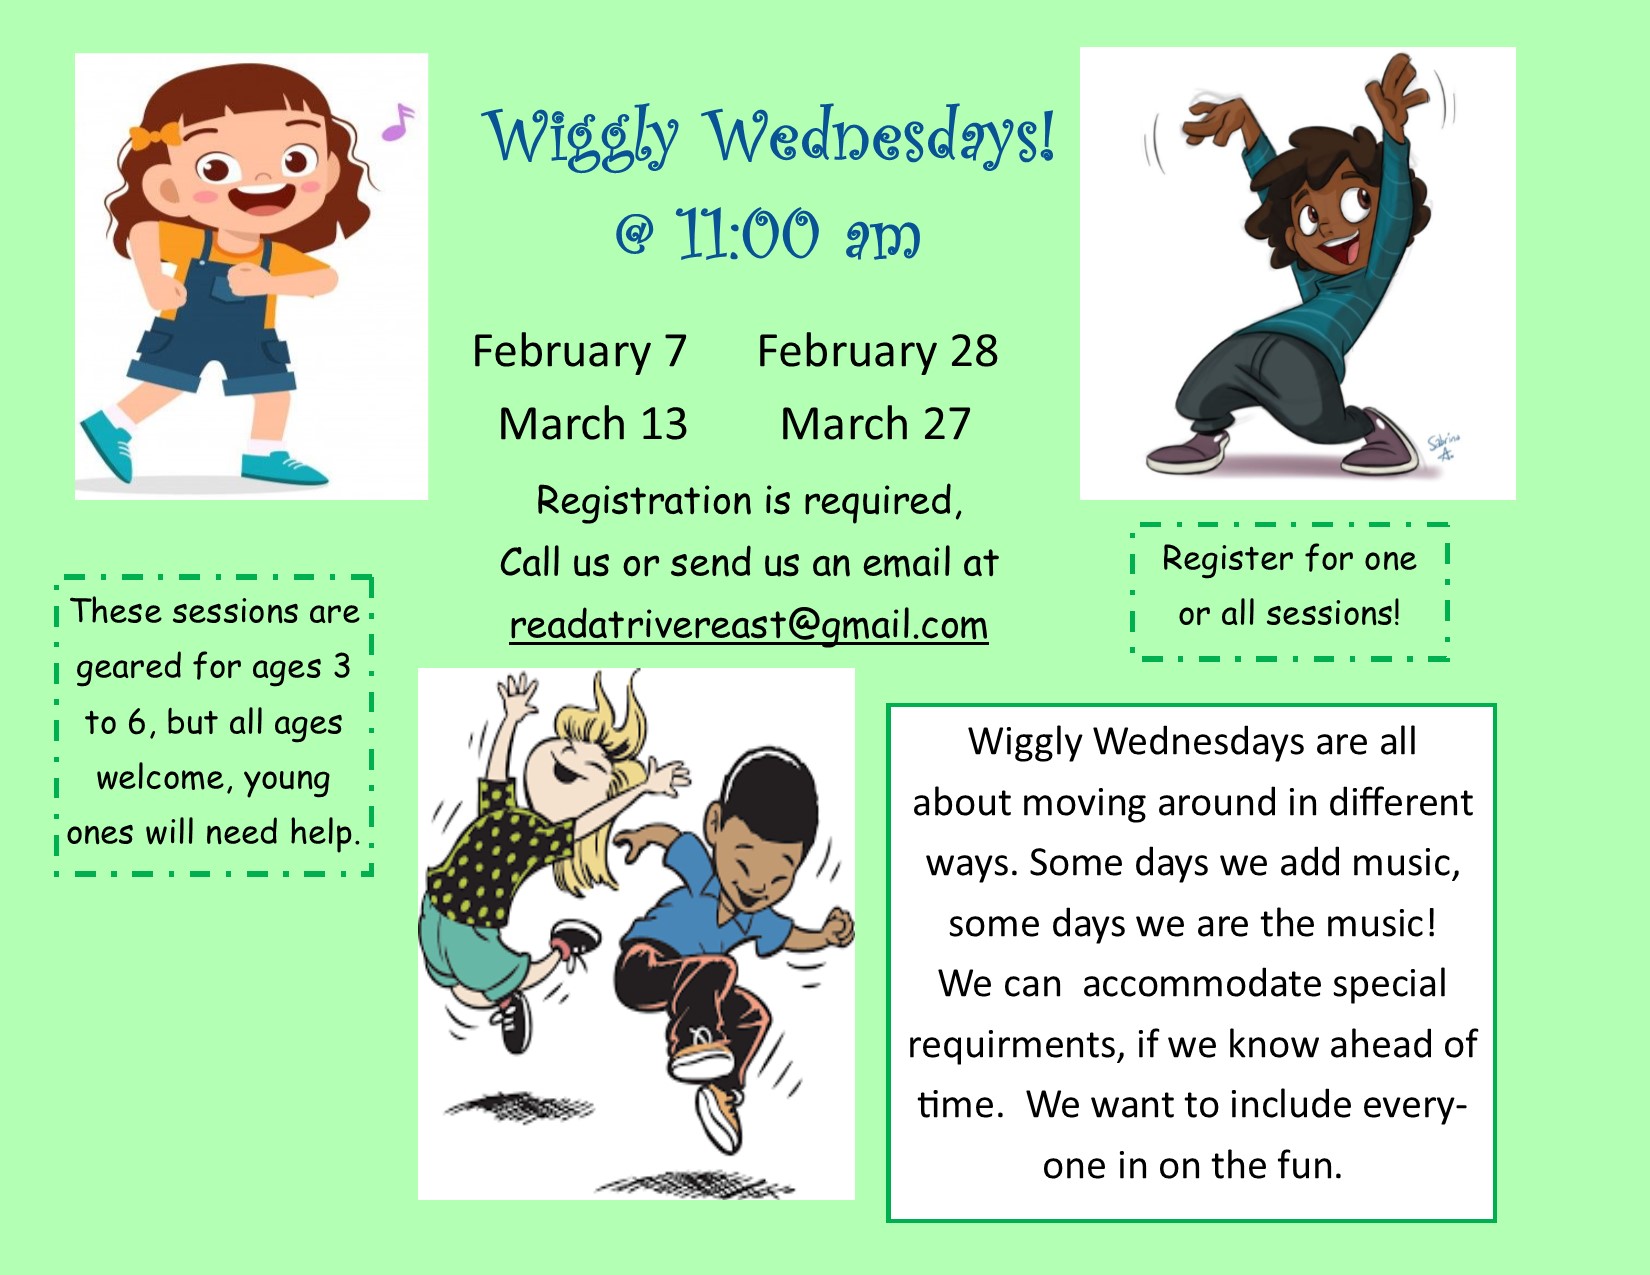 poster advertising our wiggly wednesday program